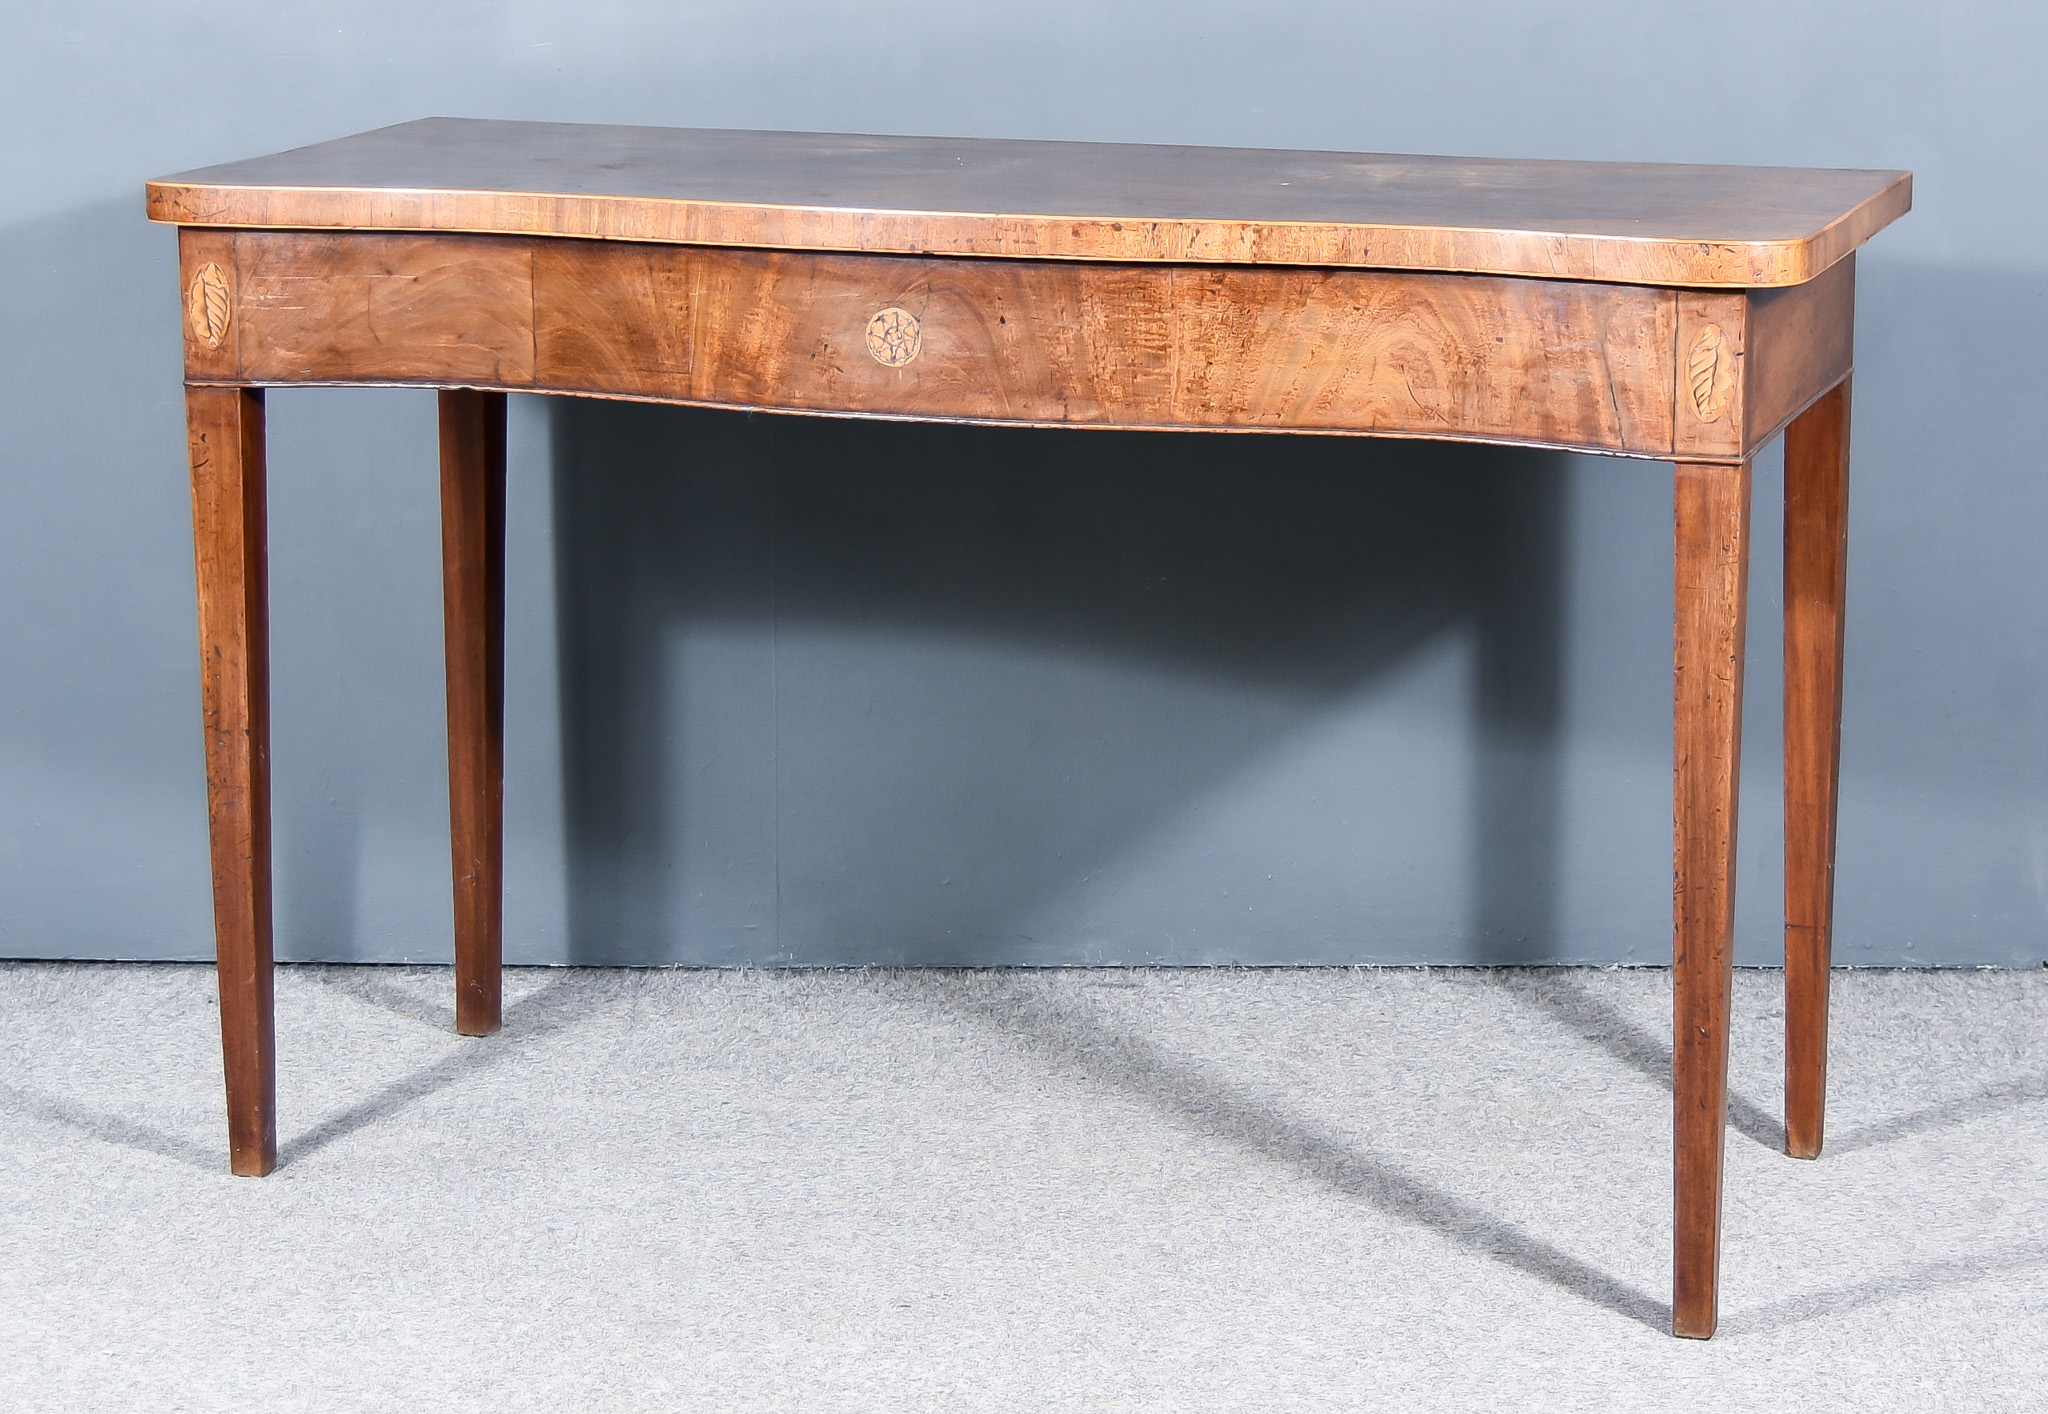 A 19th Century Mahogany Serpentine Fronted Side Table, inlaid with boxwood stringings, the deep